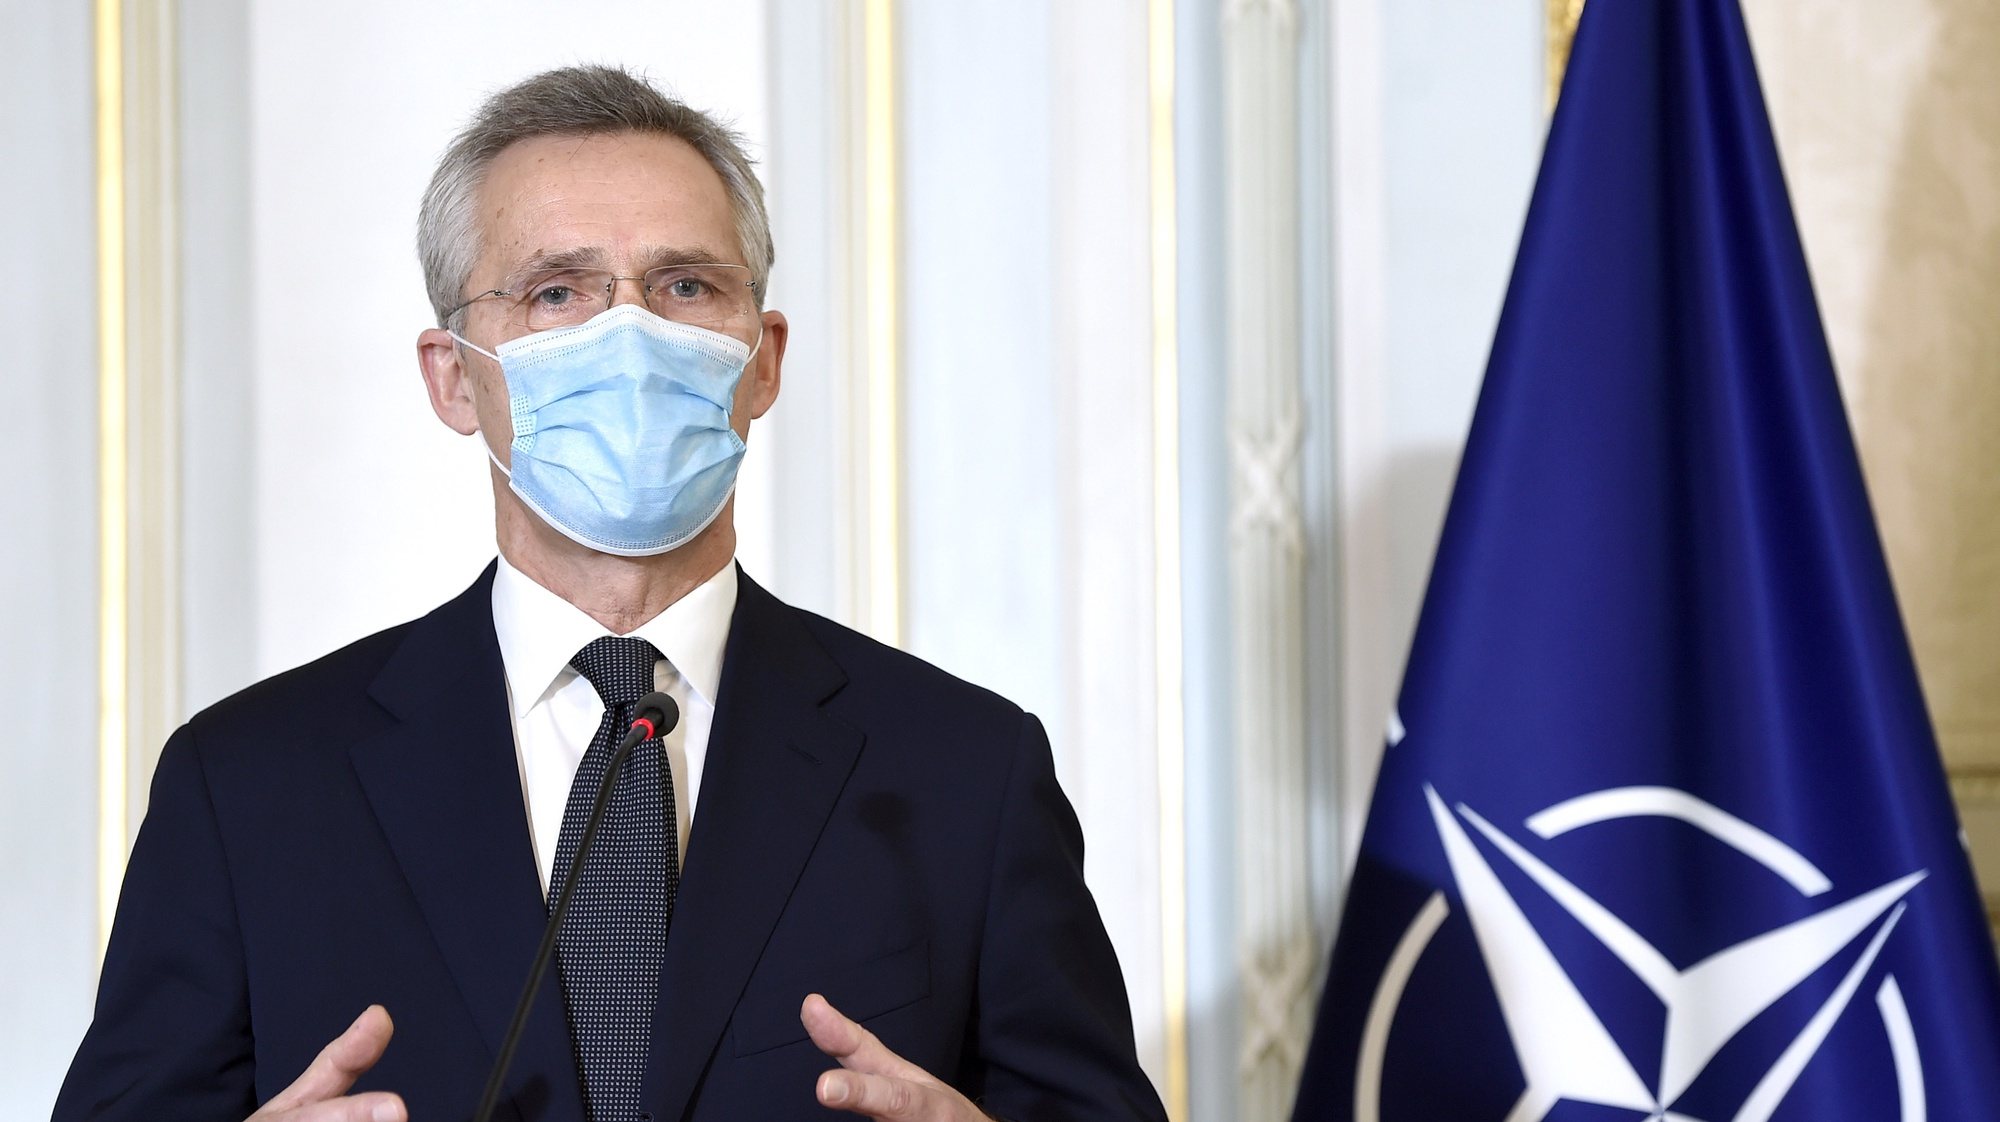 epa08986665 NATO&#039;s Secretary General Jens Stoltenberg speaks at an introductory and work meeting with Belgian Prime Minister Alexander De Croo (not seen), in Brussels, Belgium, 04 February 2021.  EPA/DIDIER LEBRUN / POOL